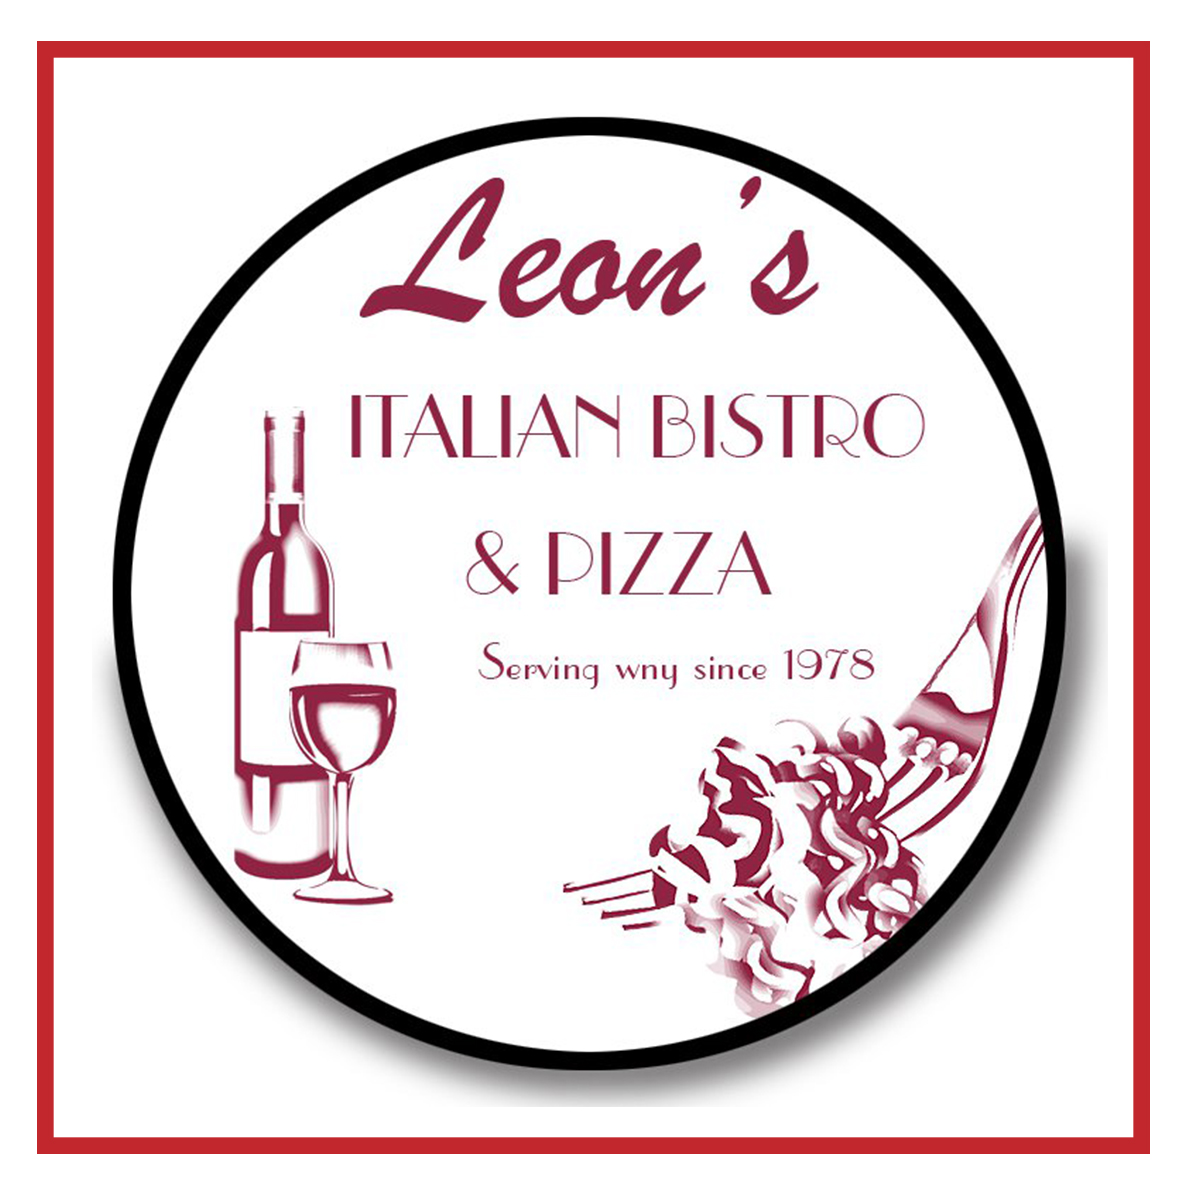 You are currently viewing Leon’s Italian Bistro & Pizza